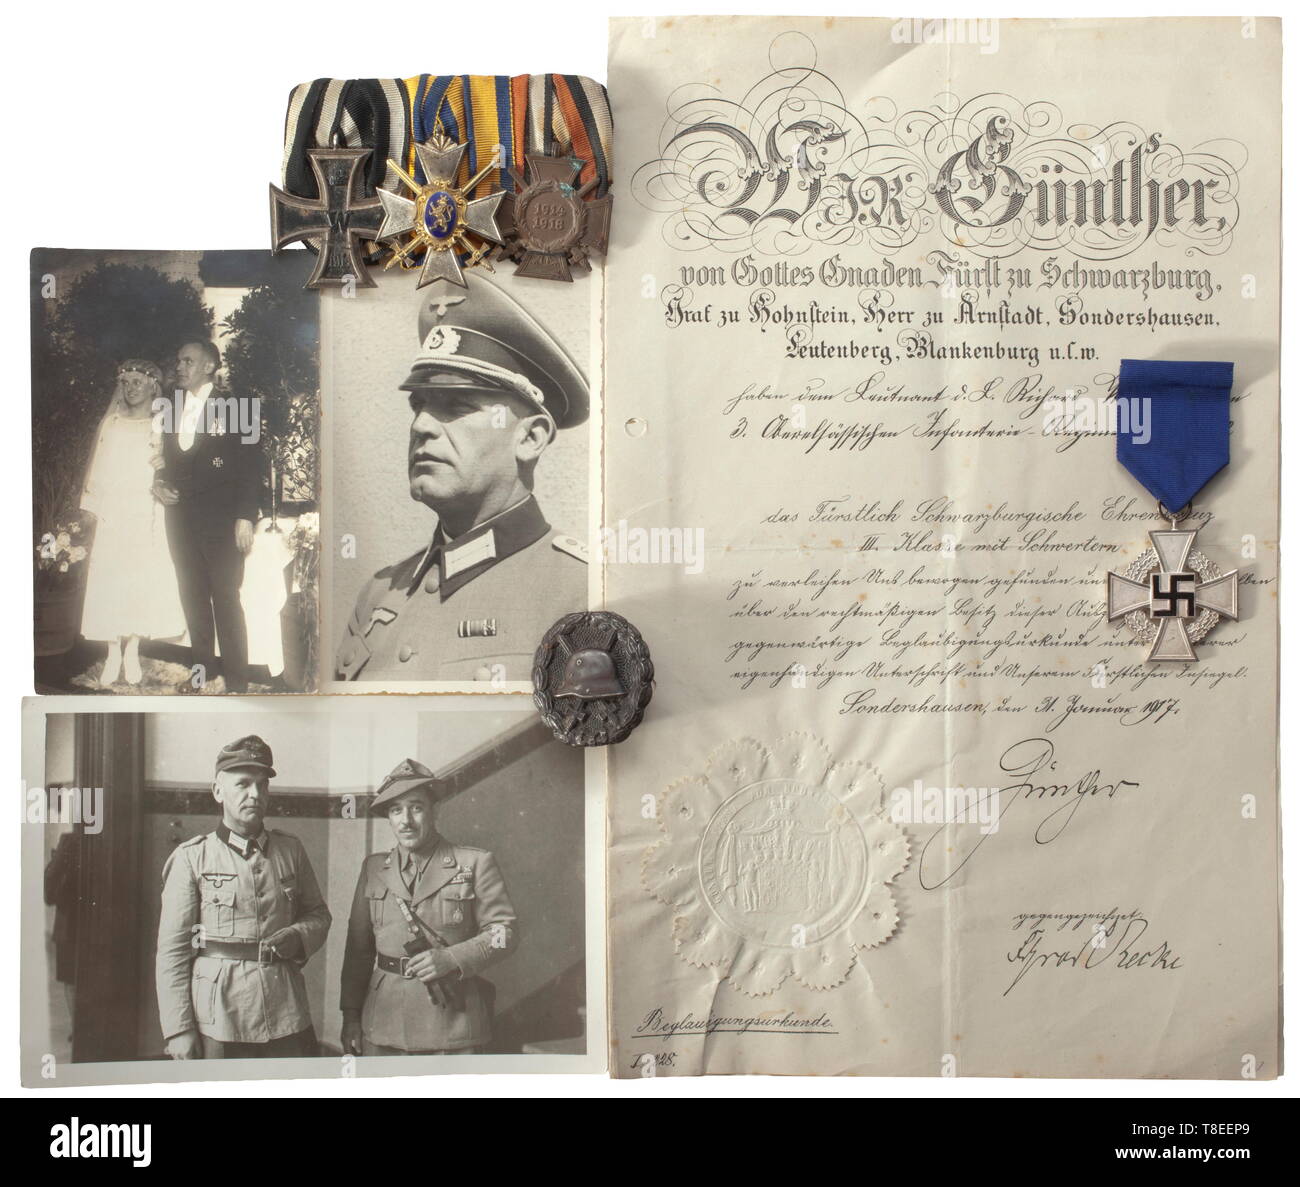 Decorations and documents grouping of Reserve Major Richard Wernecke (1895 - 1958) Three-piece orders clasp with Prussia: Iron Cross 2nd Class of 1914, Schwarzburg-Sondershausen: Honour Cross 3rd Class with Swords, German Empire: Cross of Honour for Front Fighters 1934. Also, a Wound Badge in Black 1918 and a Faithful Service Decoration 2nd Class 1938. Included are a case of the Sondershausen court jeweller 'Karl Schühle' for the Honour Cross and the award document of 1917 with transmittal letter and statute copy, the award documents for the Iron, Additional-Rights-Clearance-Info-Not-Available Stock Photo